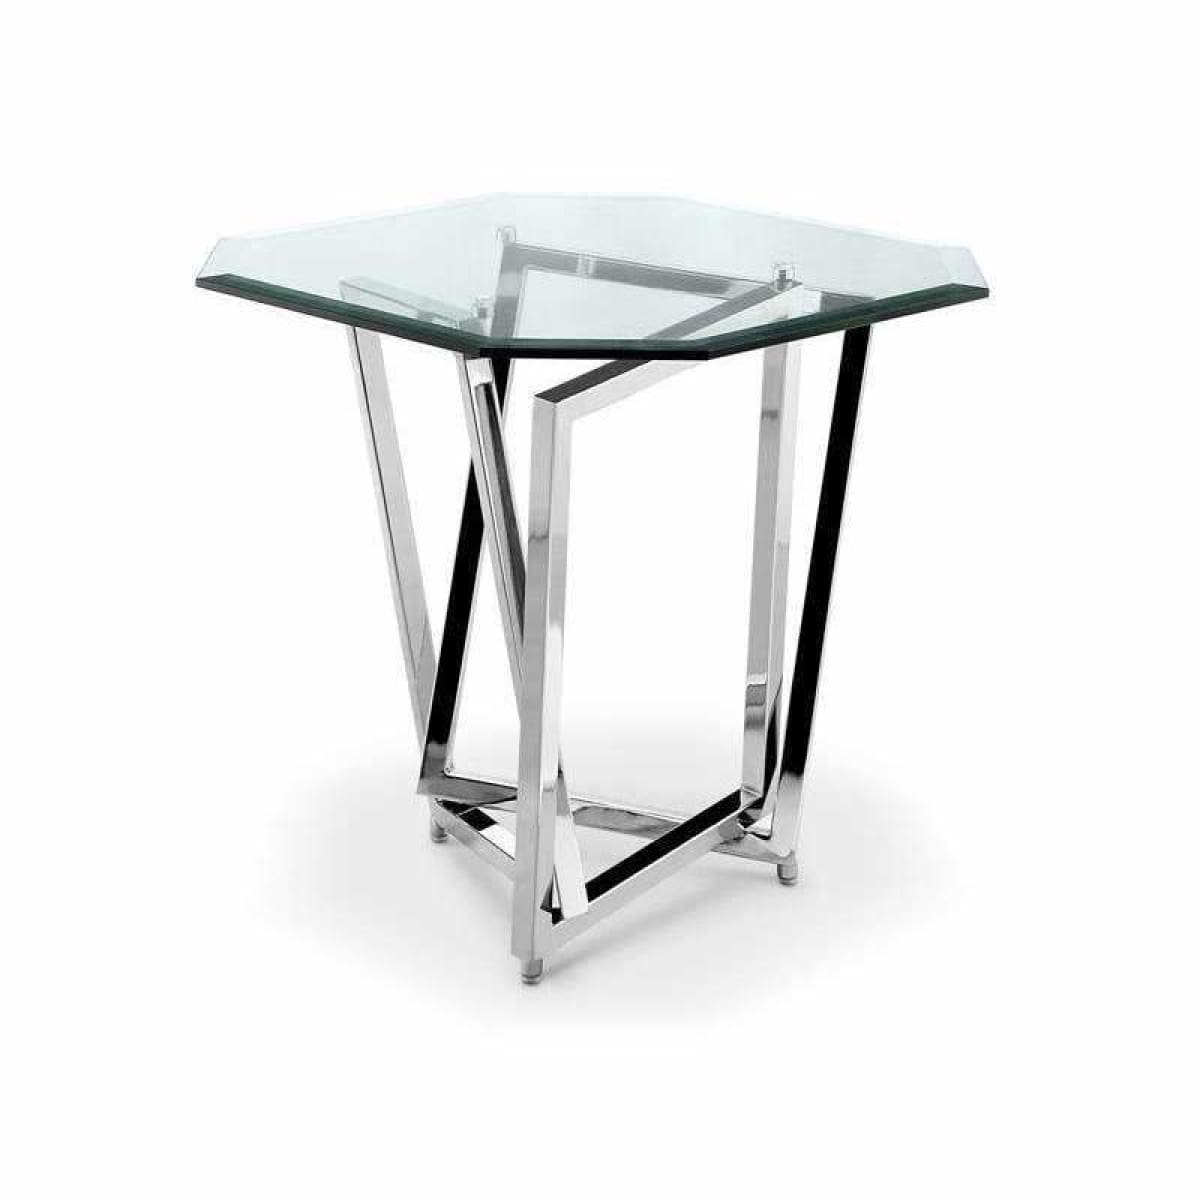 Lenox SquareOctoganal End Table - END TABLE/SIDE TABLE